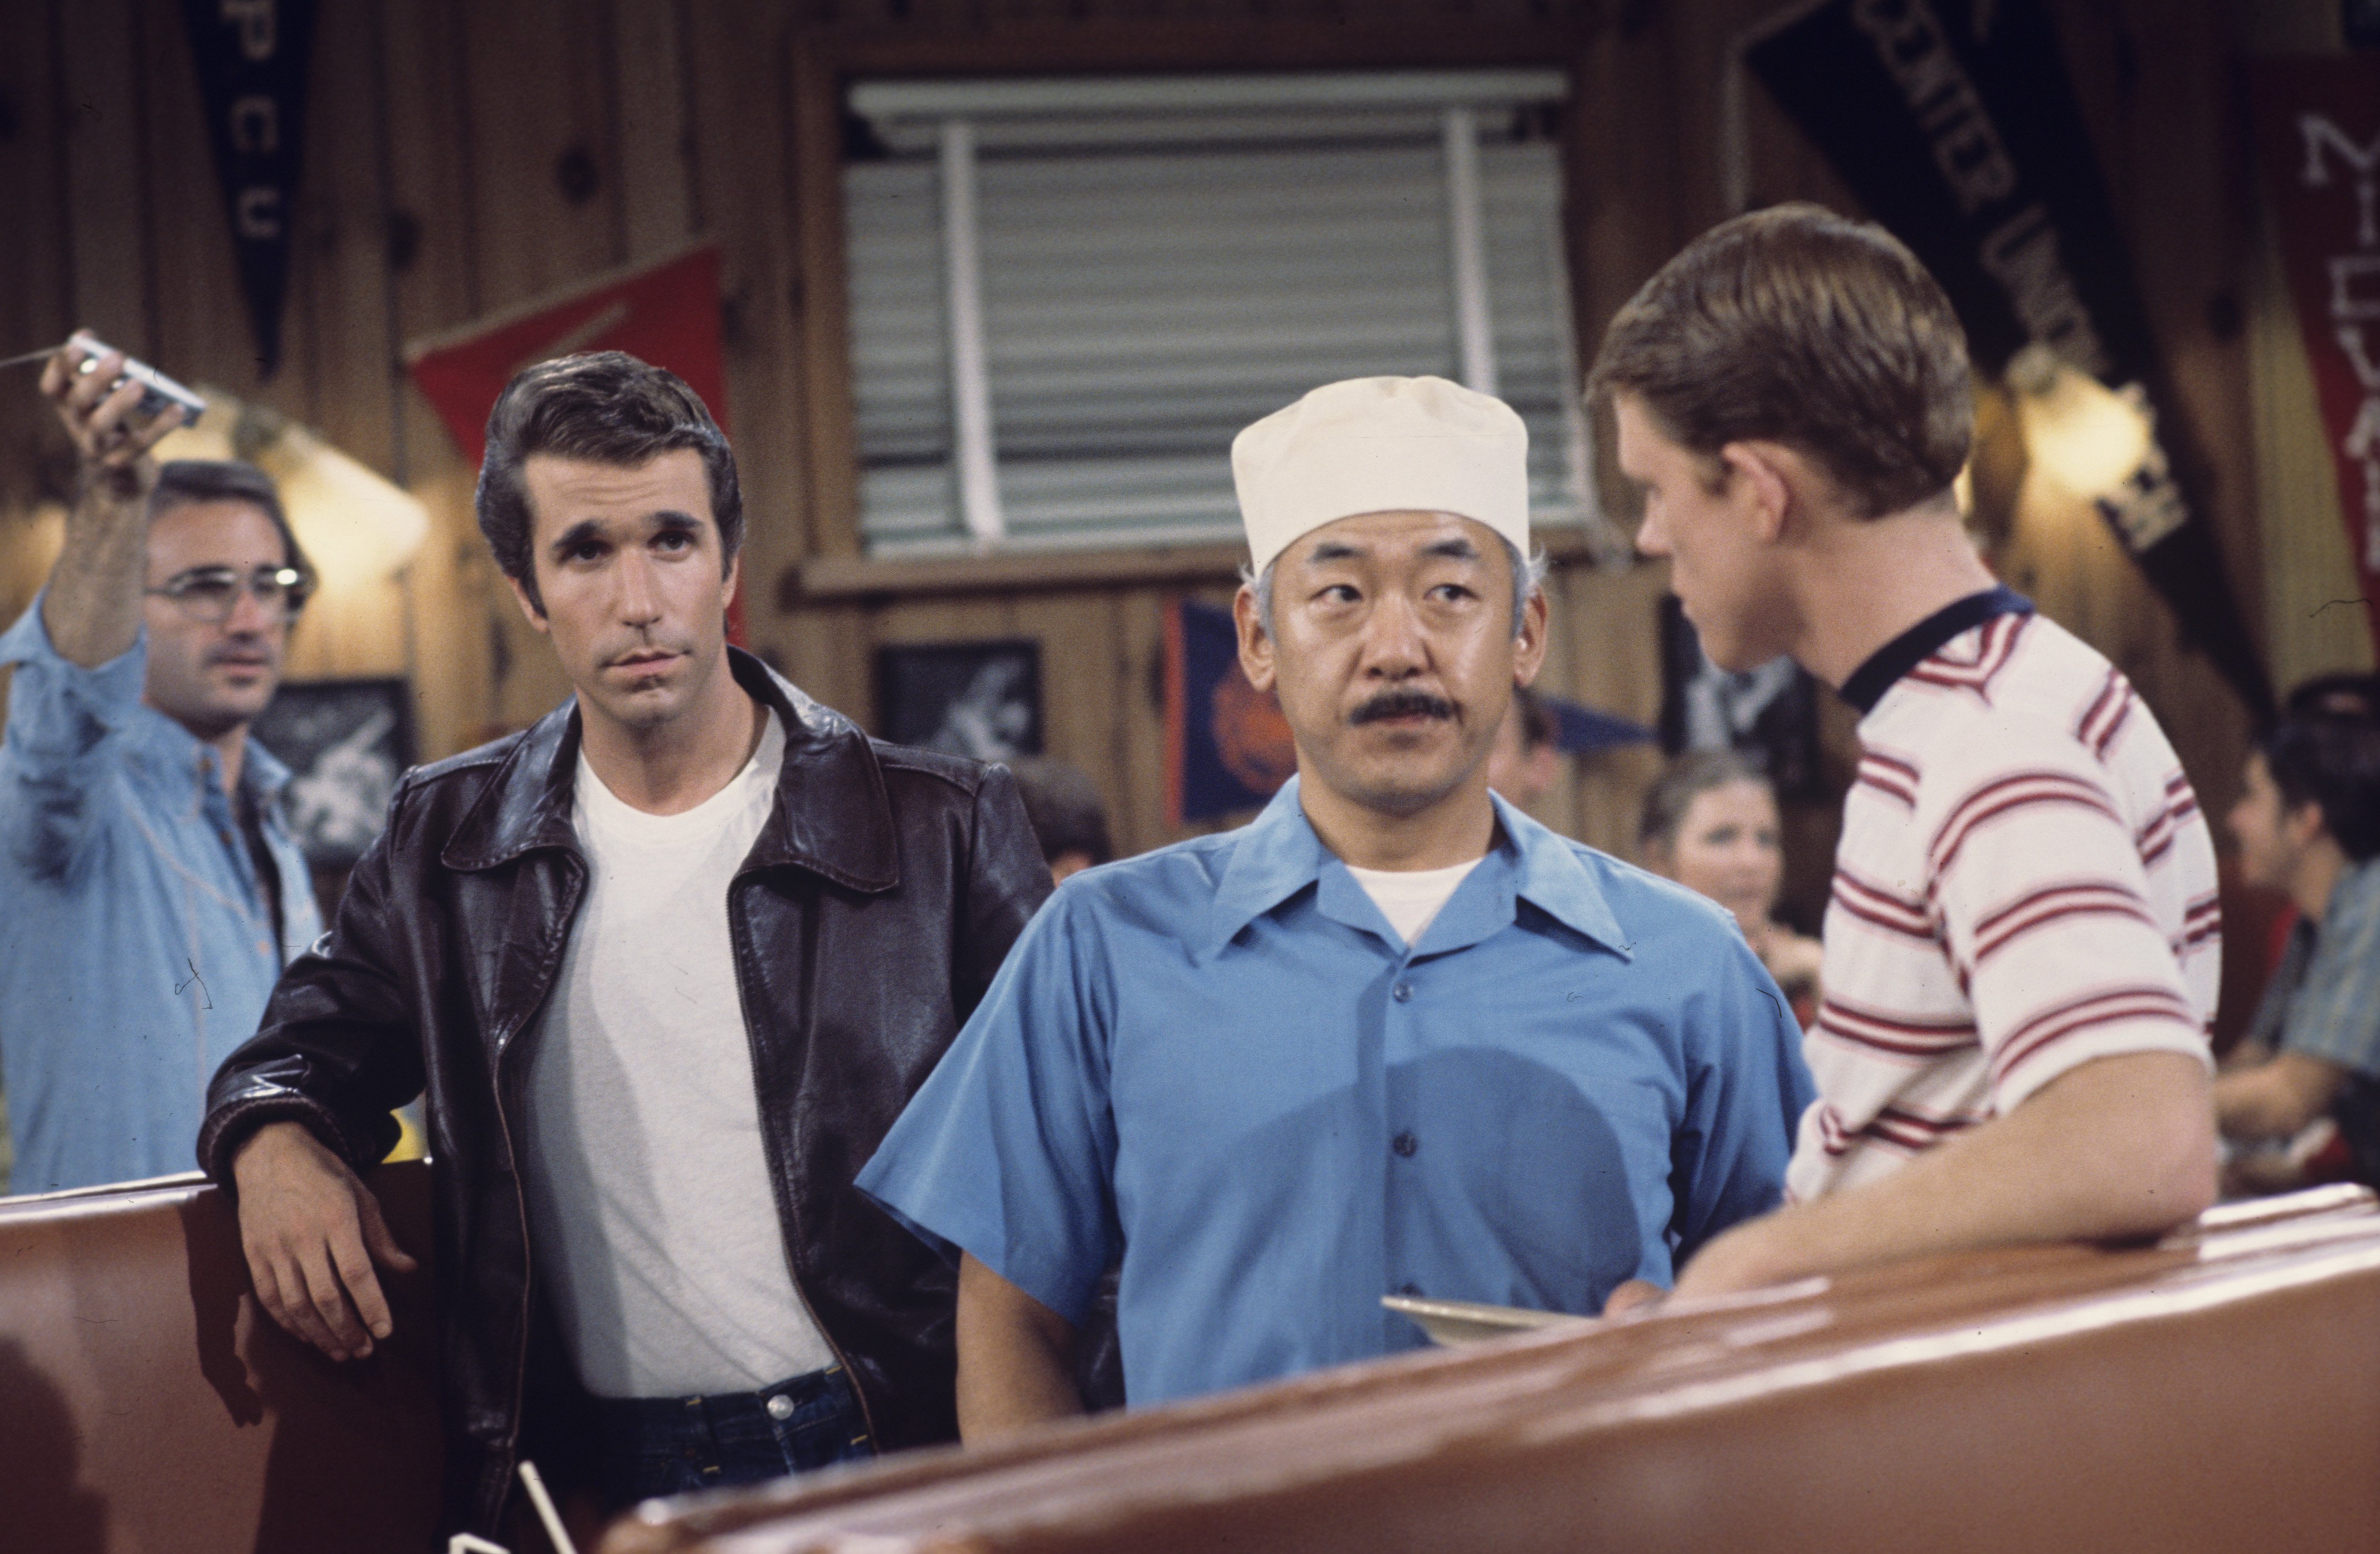 Pat Morita as Matsuo "Arnold" Takahashi alongside Henry Winkler as Fonzie in "Happy Days" on October 10, 1975. | Source: Getty Images